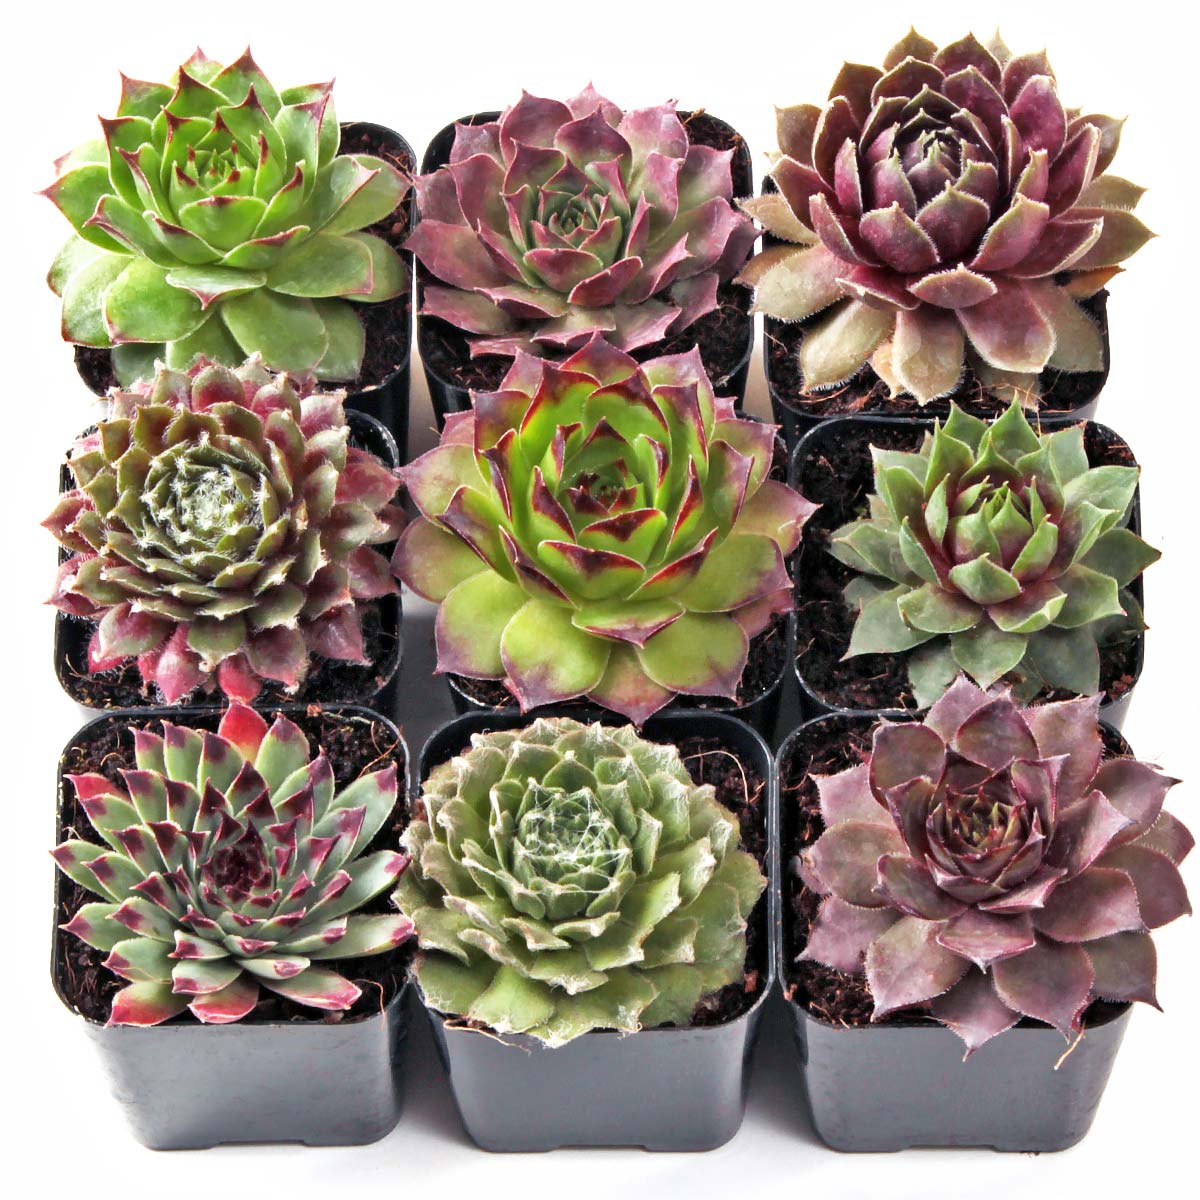 Sempervivum Set of 9 Types - 2in Pots w/ ID Questions & Answers